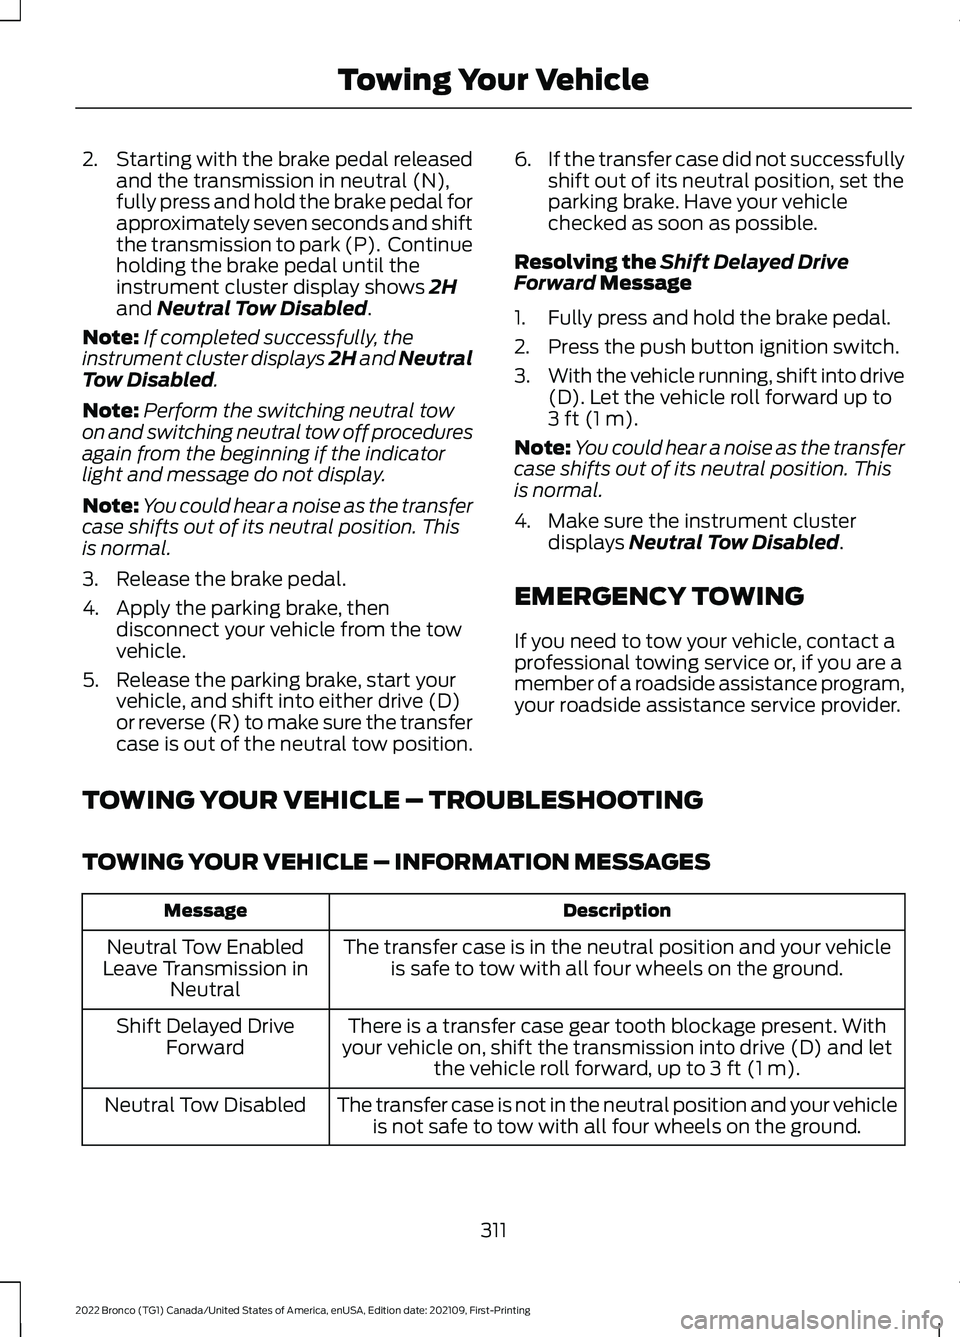 FORD BRONCO 2022 Service Manual 2.Starting with the brake pedal releasedand the transmission in neutral (N),fully press and hold the brake pedal forapproximately seven seconds and shiftthe transmission to park (P).  Continueholding 